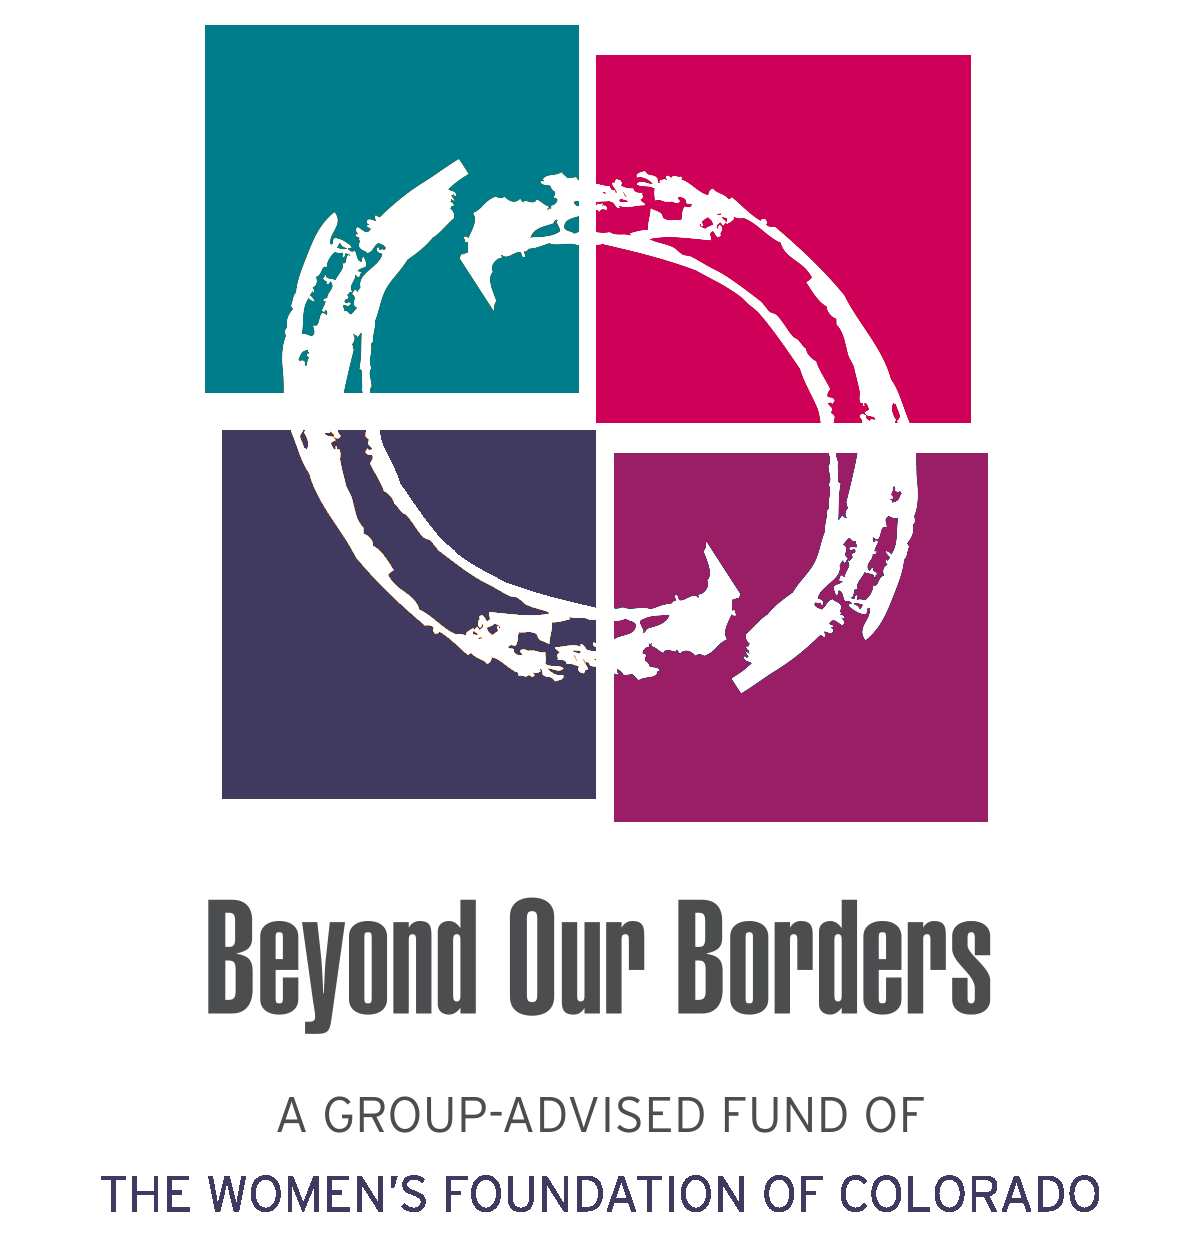 Borders Logo - Beyond Our Borders - The Women's Foundation of Colorado